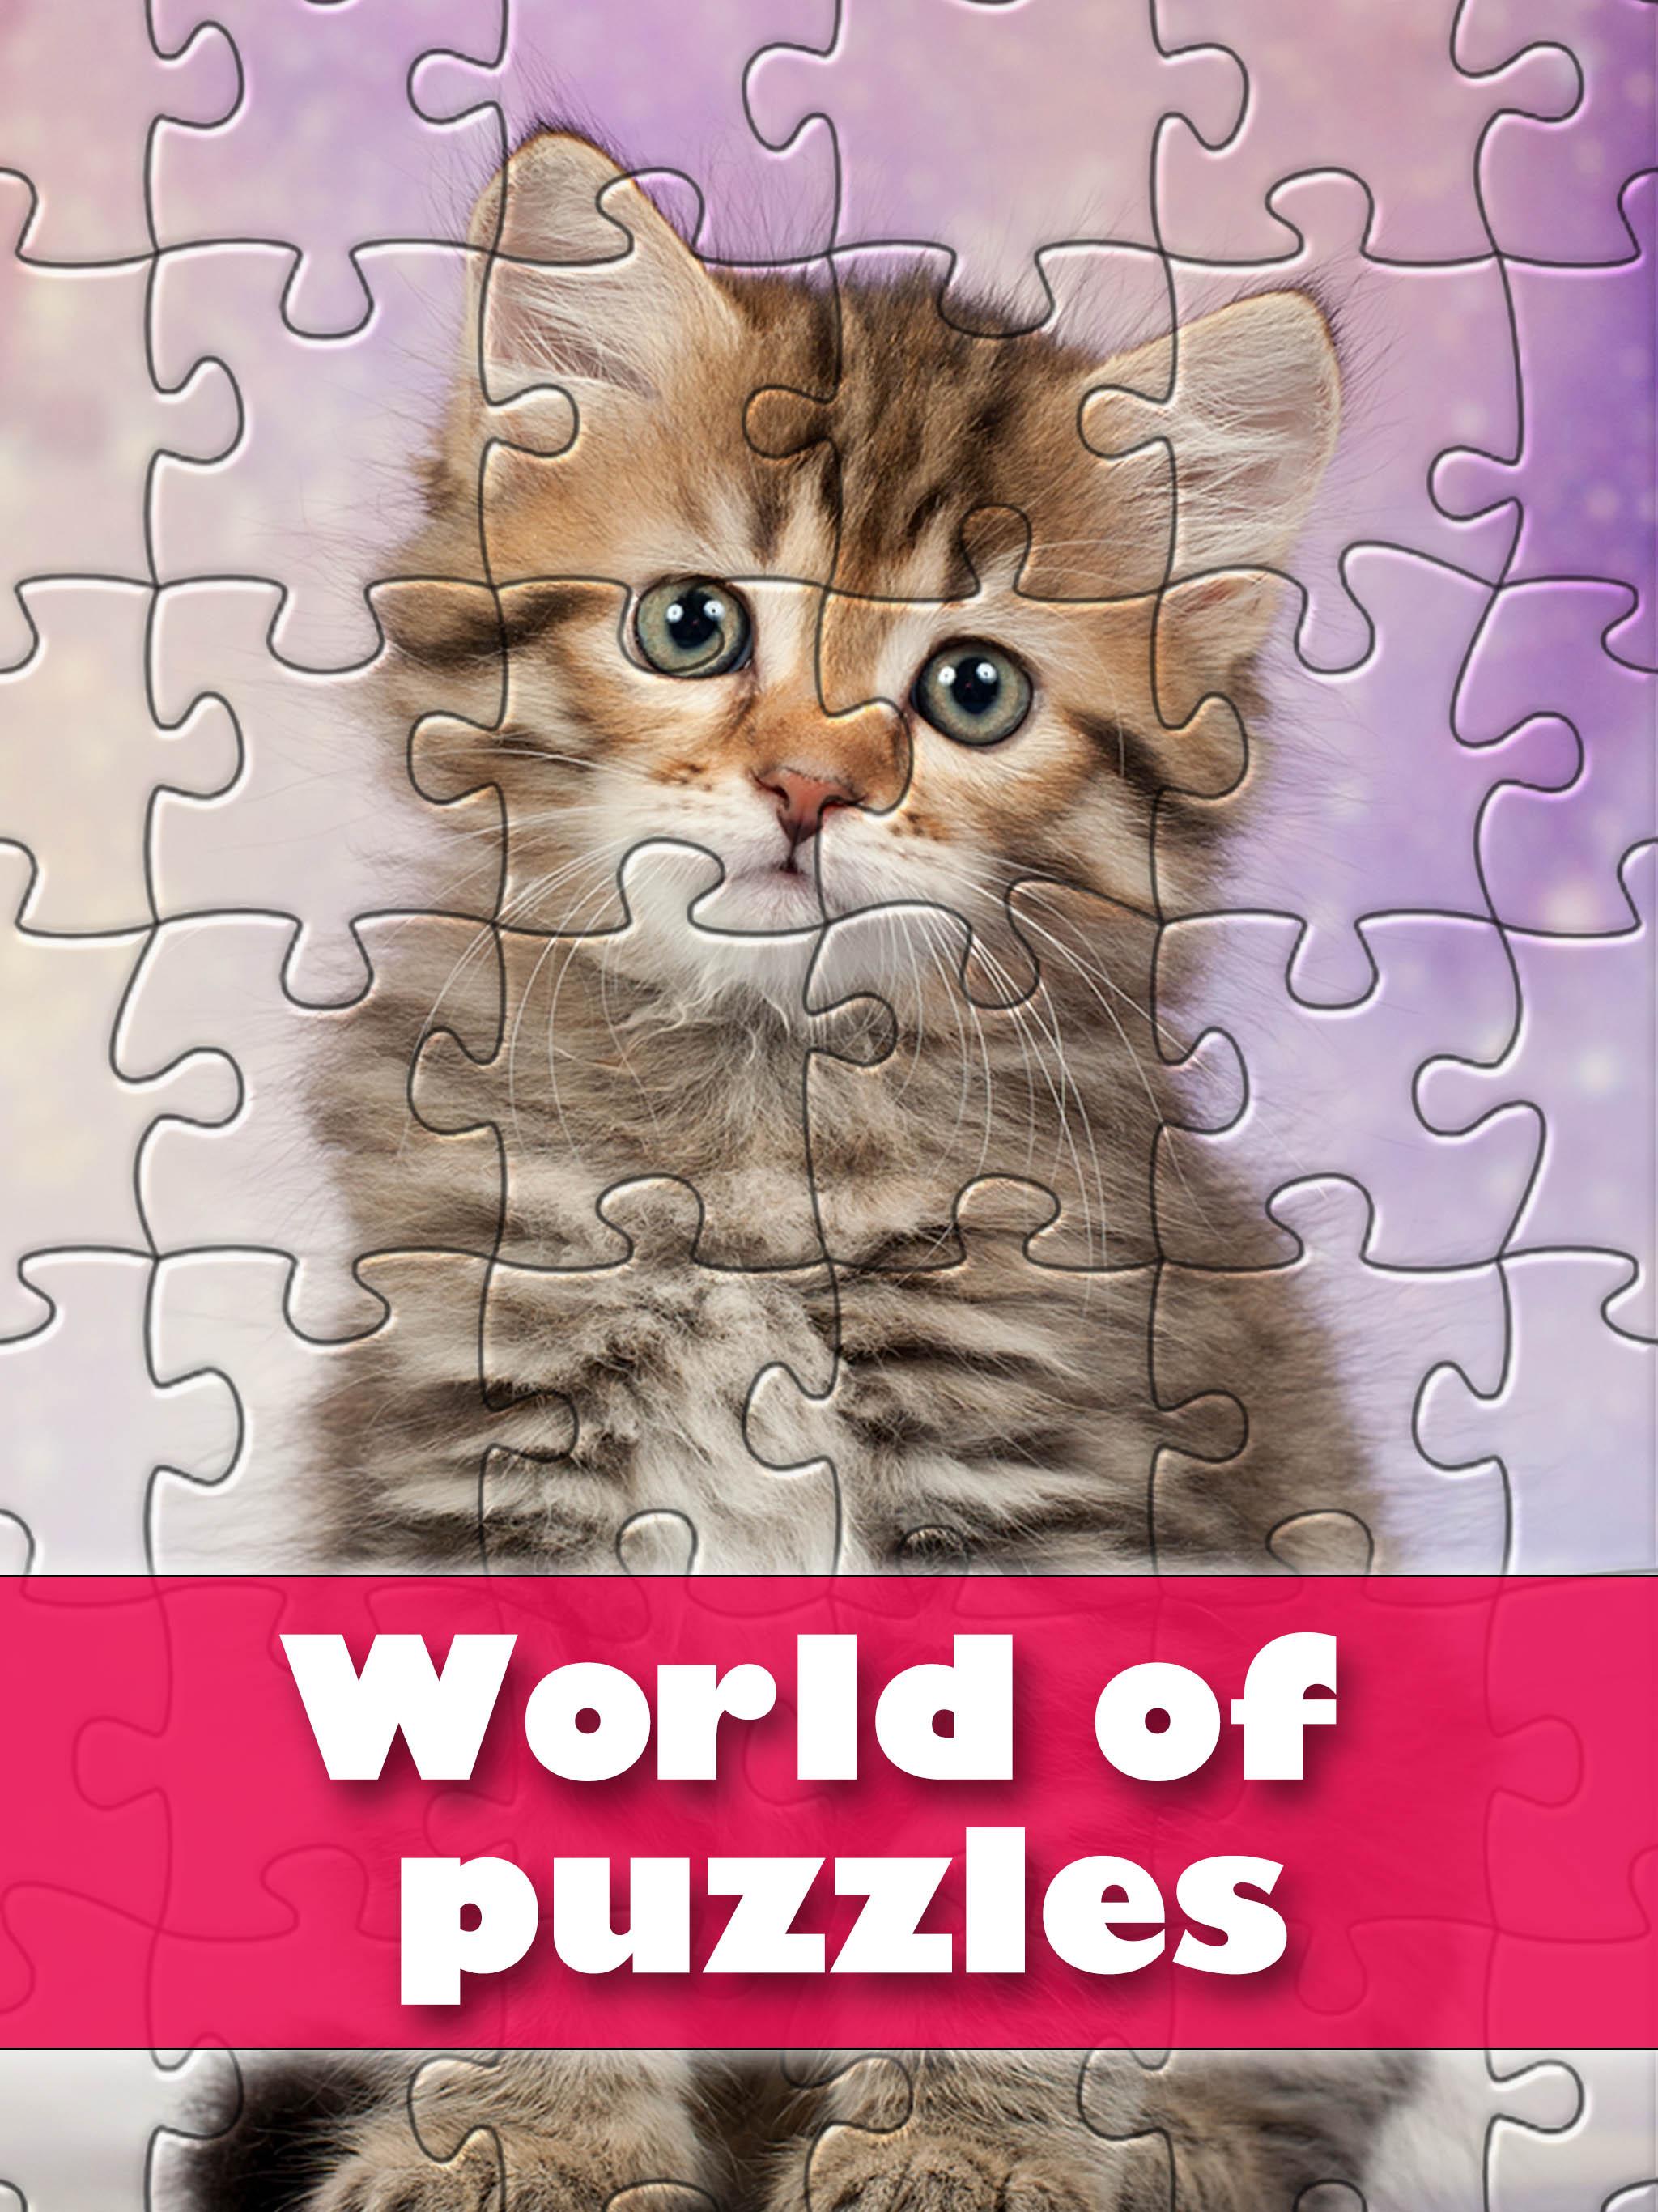 World of Puzzles - best free jigsaw puzzle games 1.16 Screenshot 5